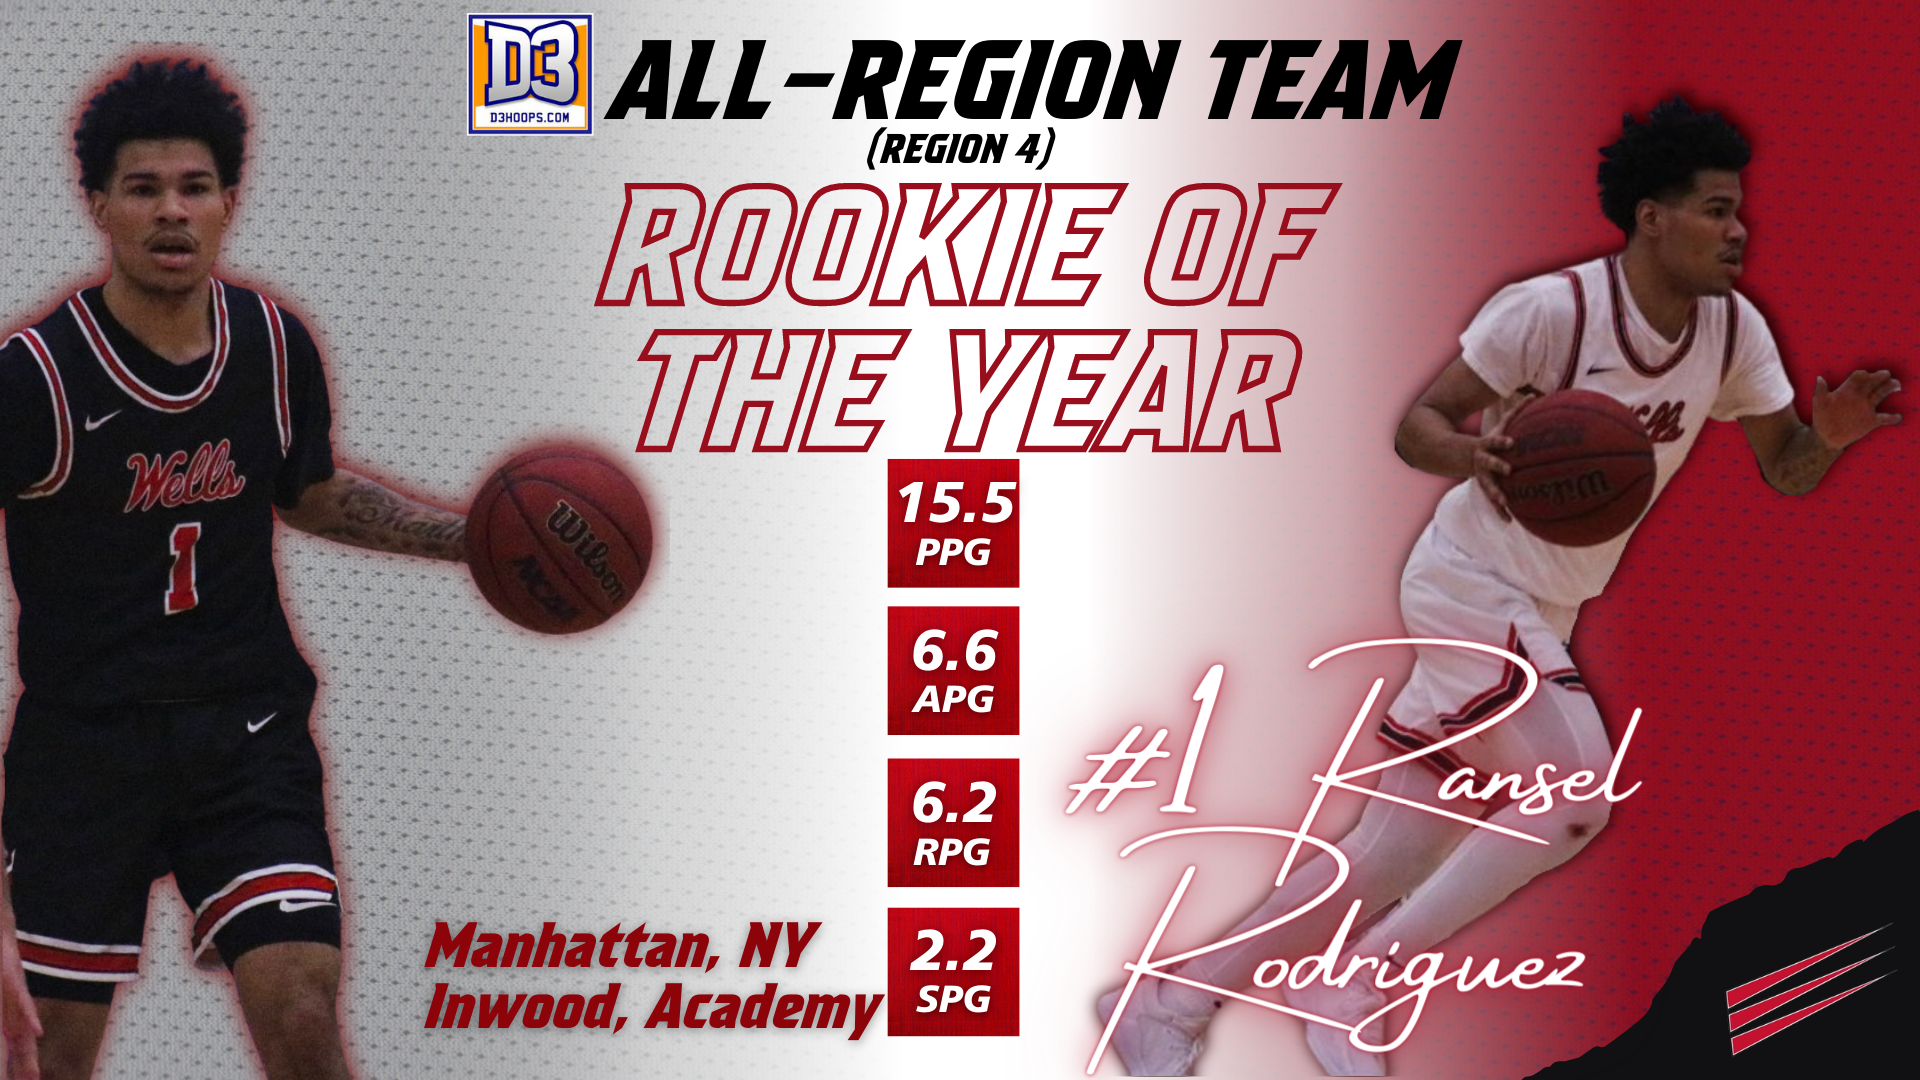 Rodriguez Named All Region Rookie of The Year